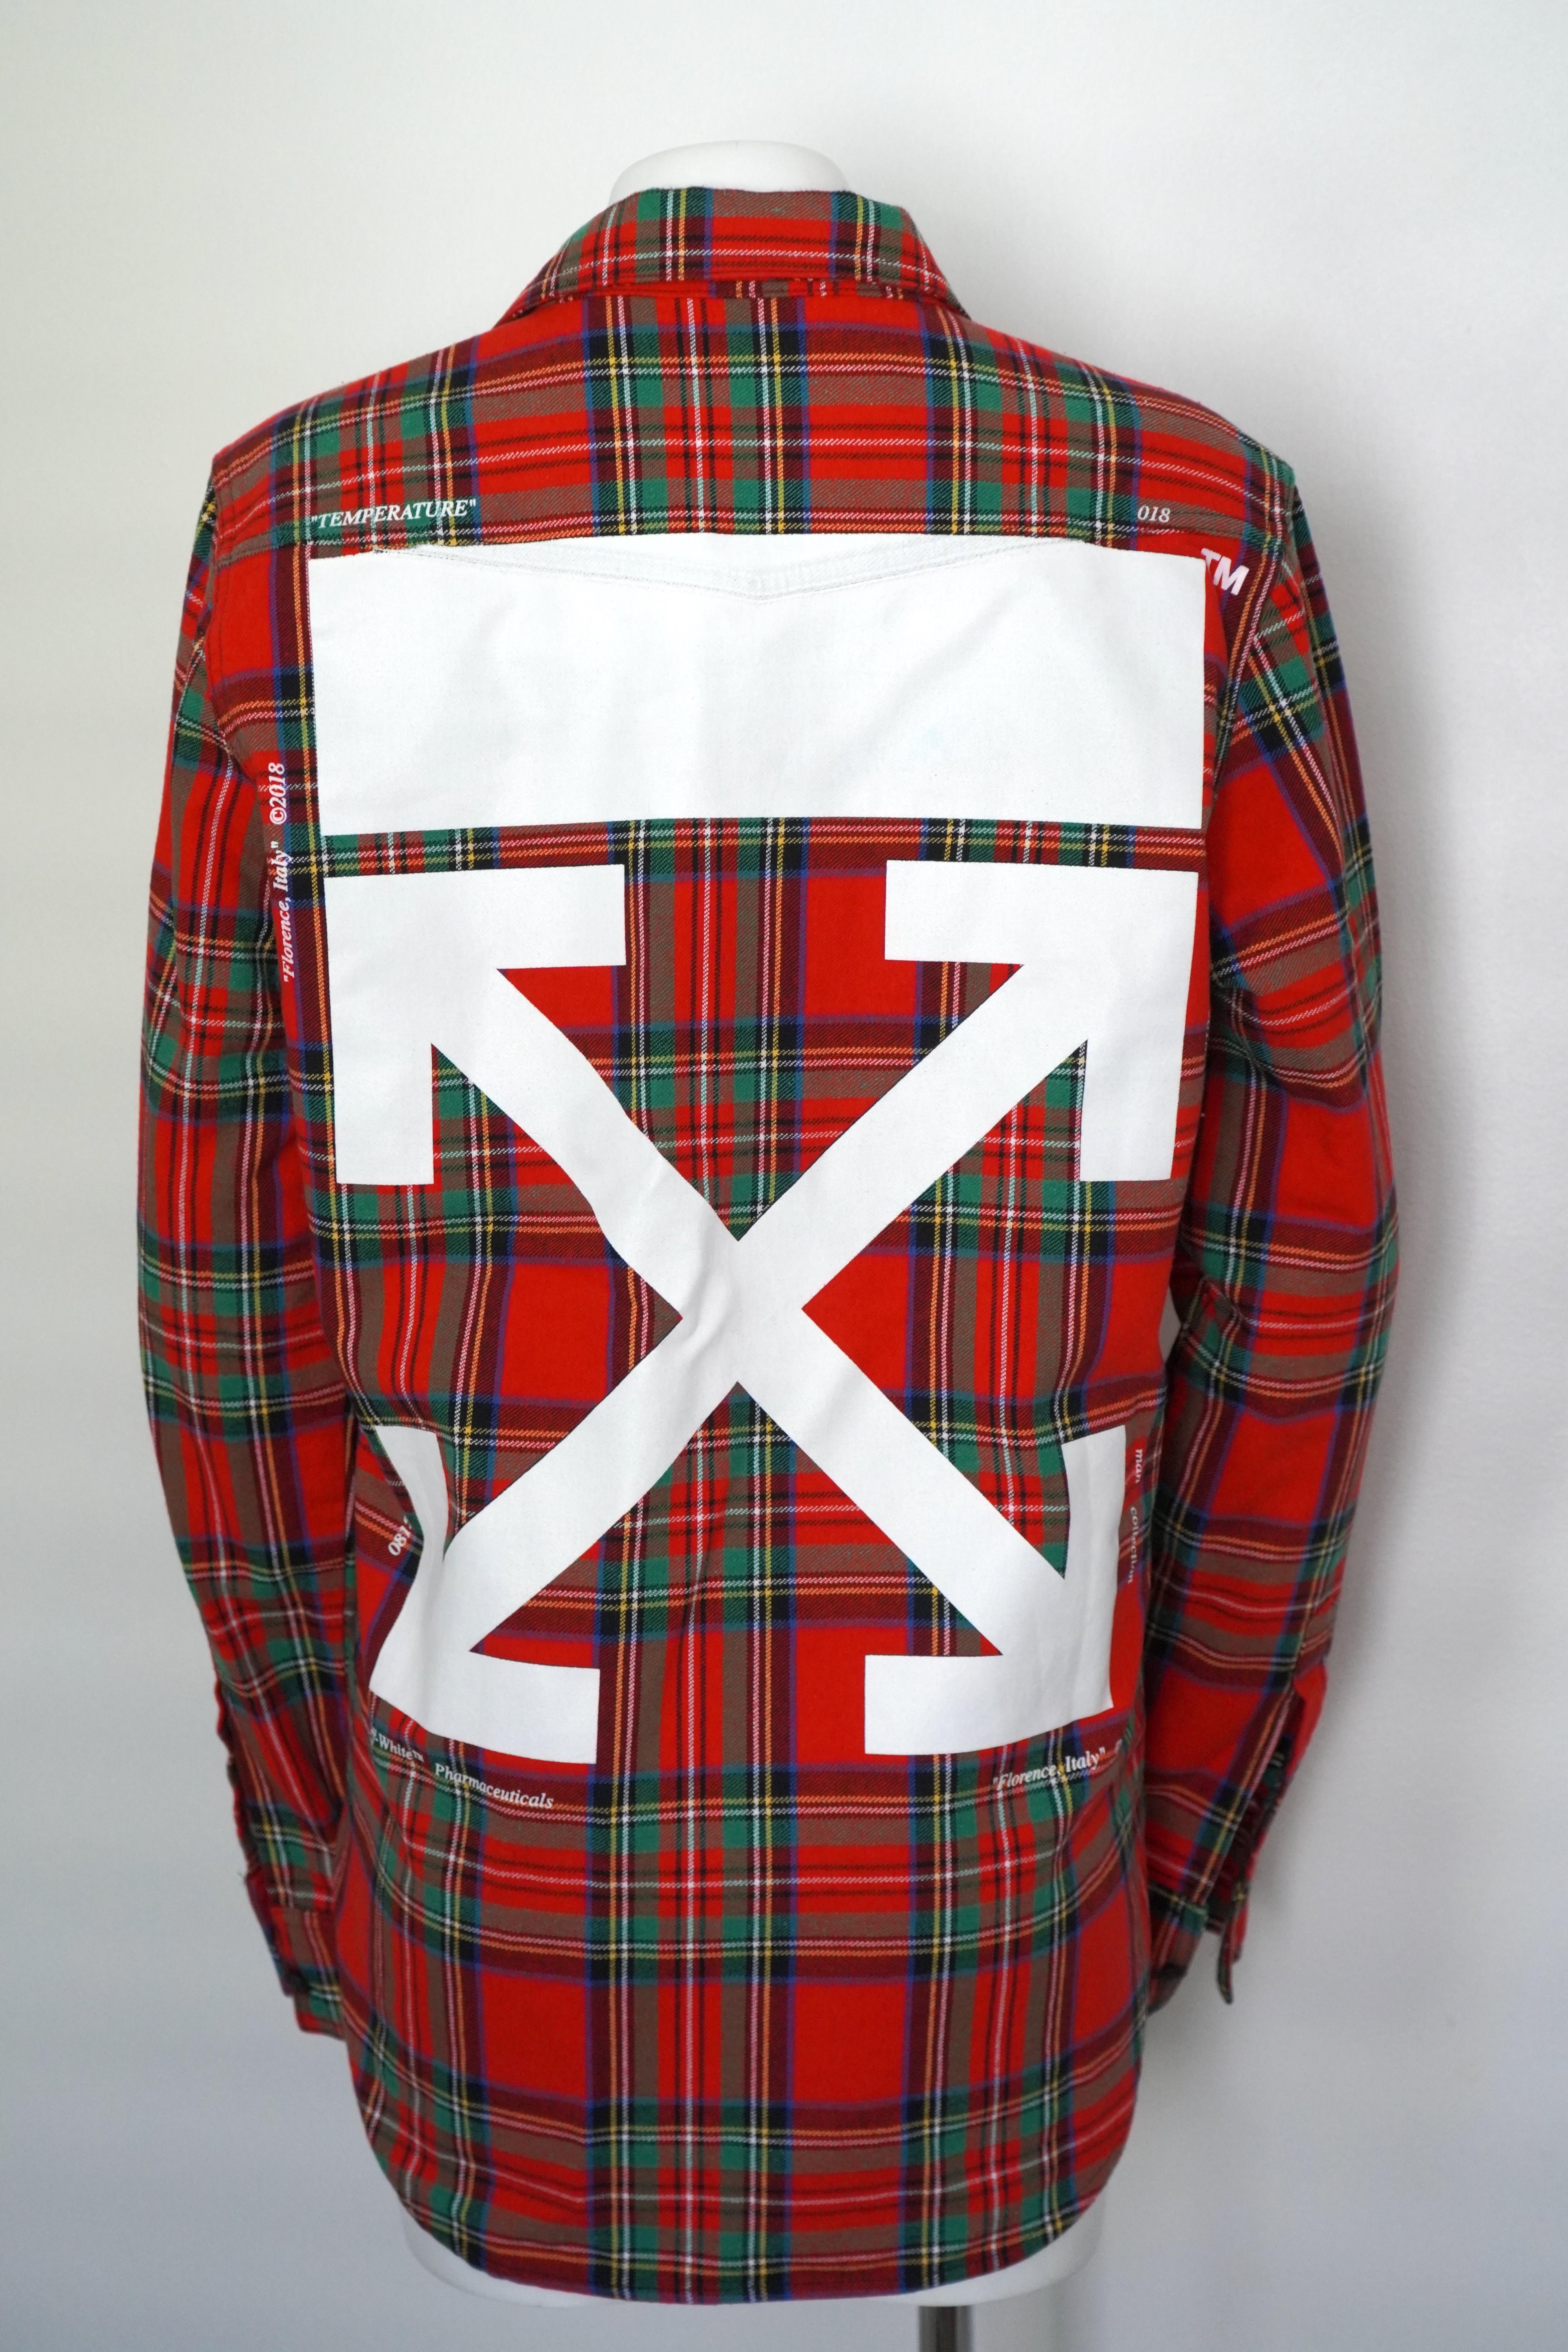 Off-White Red Plaid Flannel
Size M
Unisex
Front pocket detail
7 button front closure
Logo and details on the back
Total length is 31 inches.

This Off-White red plaid flannel is a classic wardrobe staple with a touch of urban flair. The vibrant red